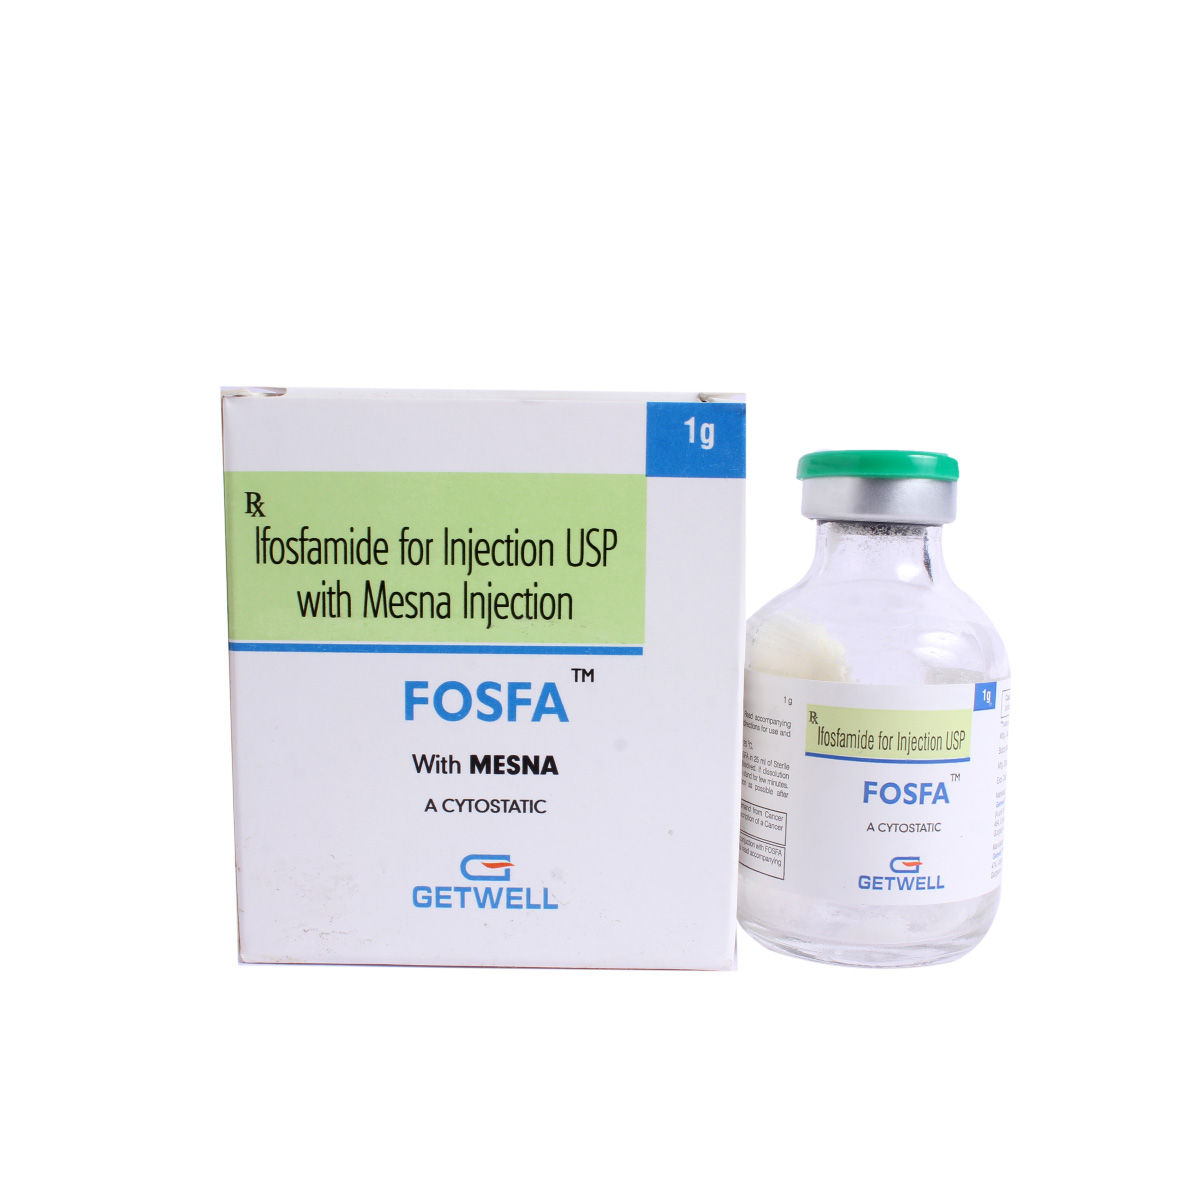 Buy Fosfa 1 gm With Mesna Injection 1's Online